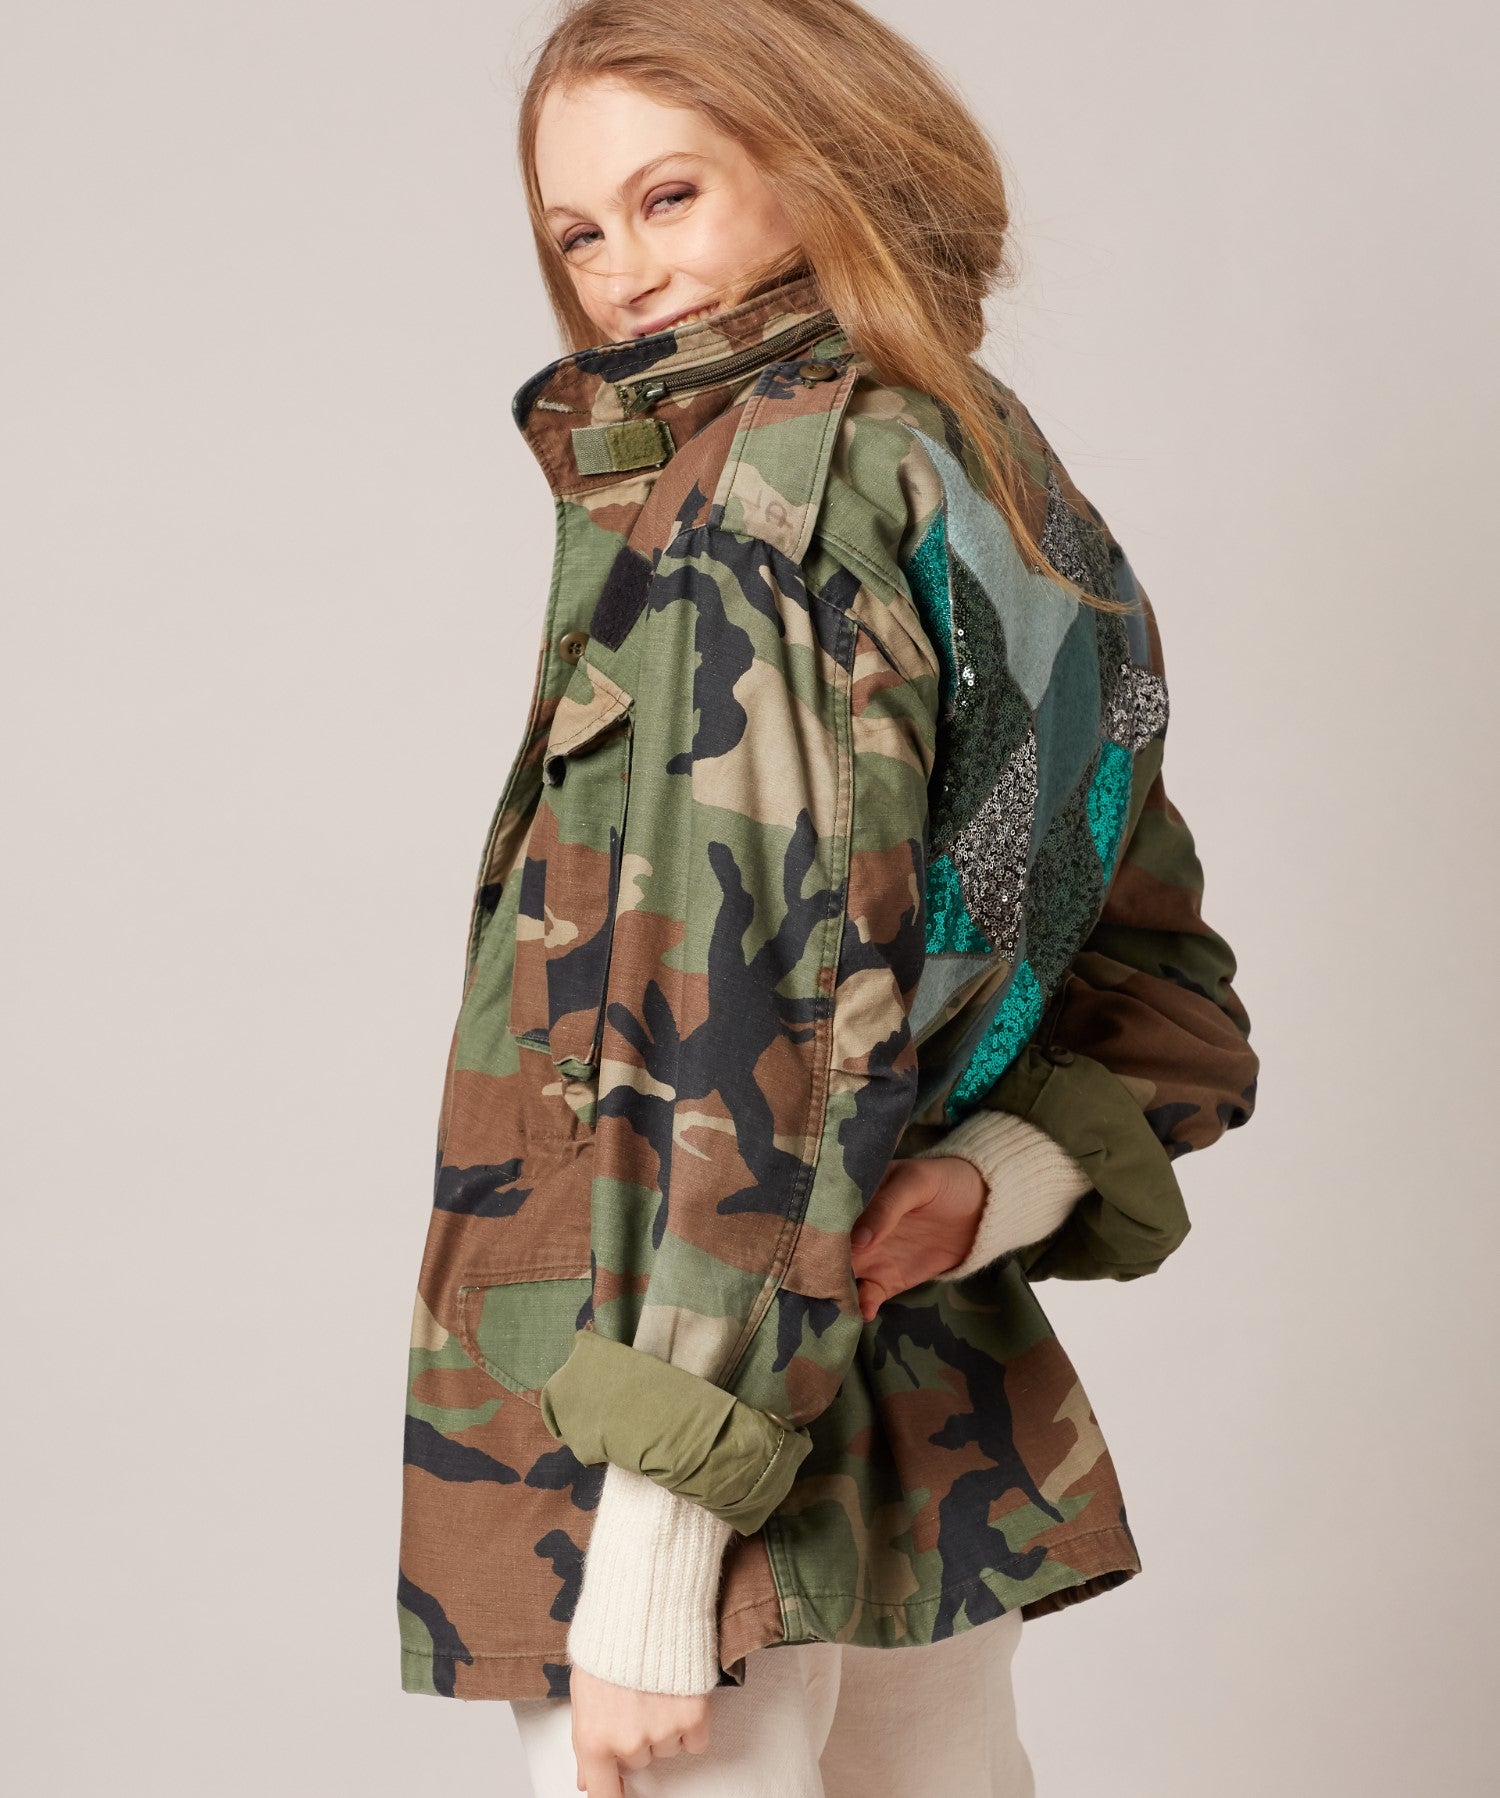 Mosaic Jacket - Custom Vintage Military Camo Jacket with Sequins – Will ...